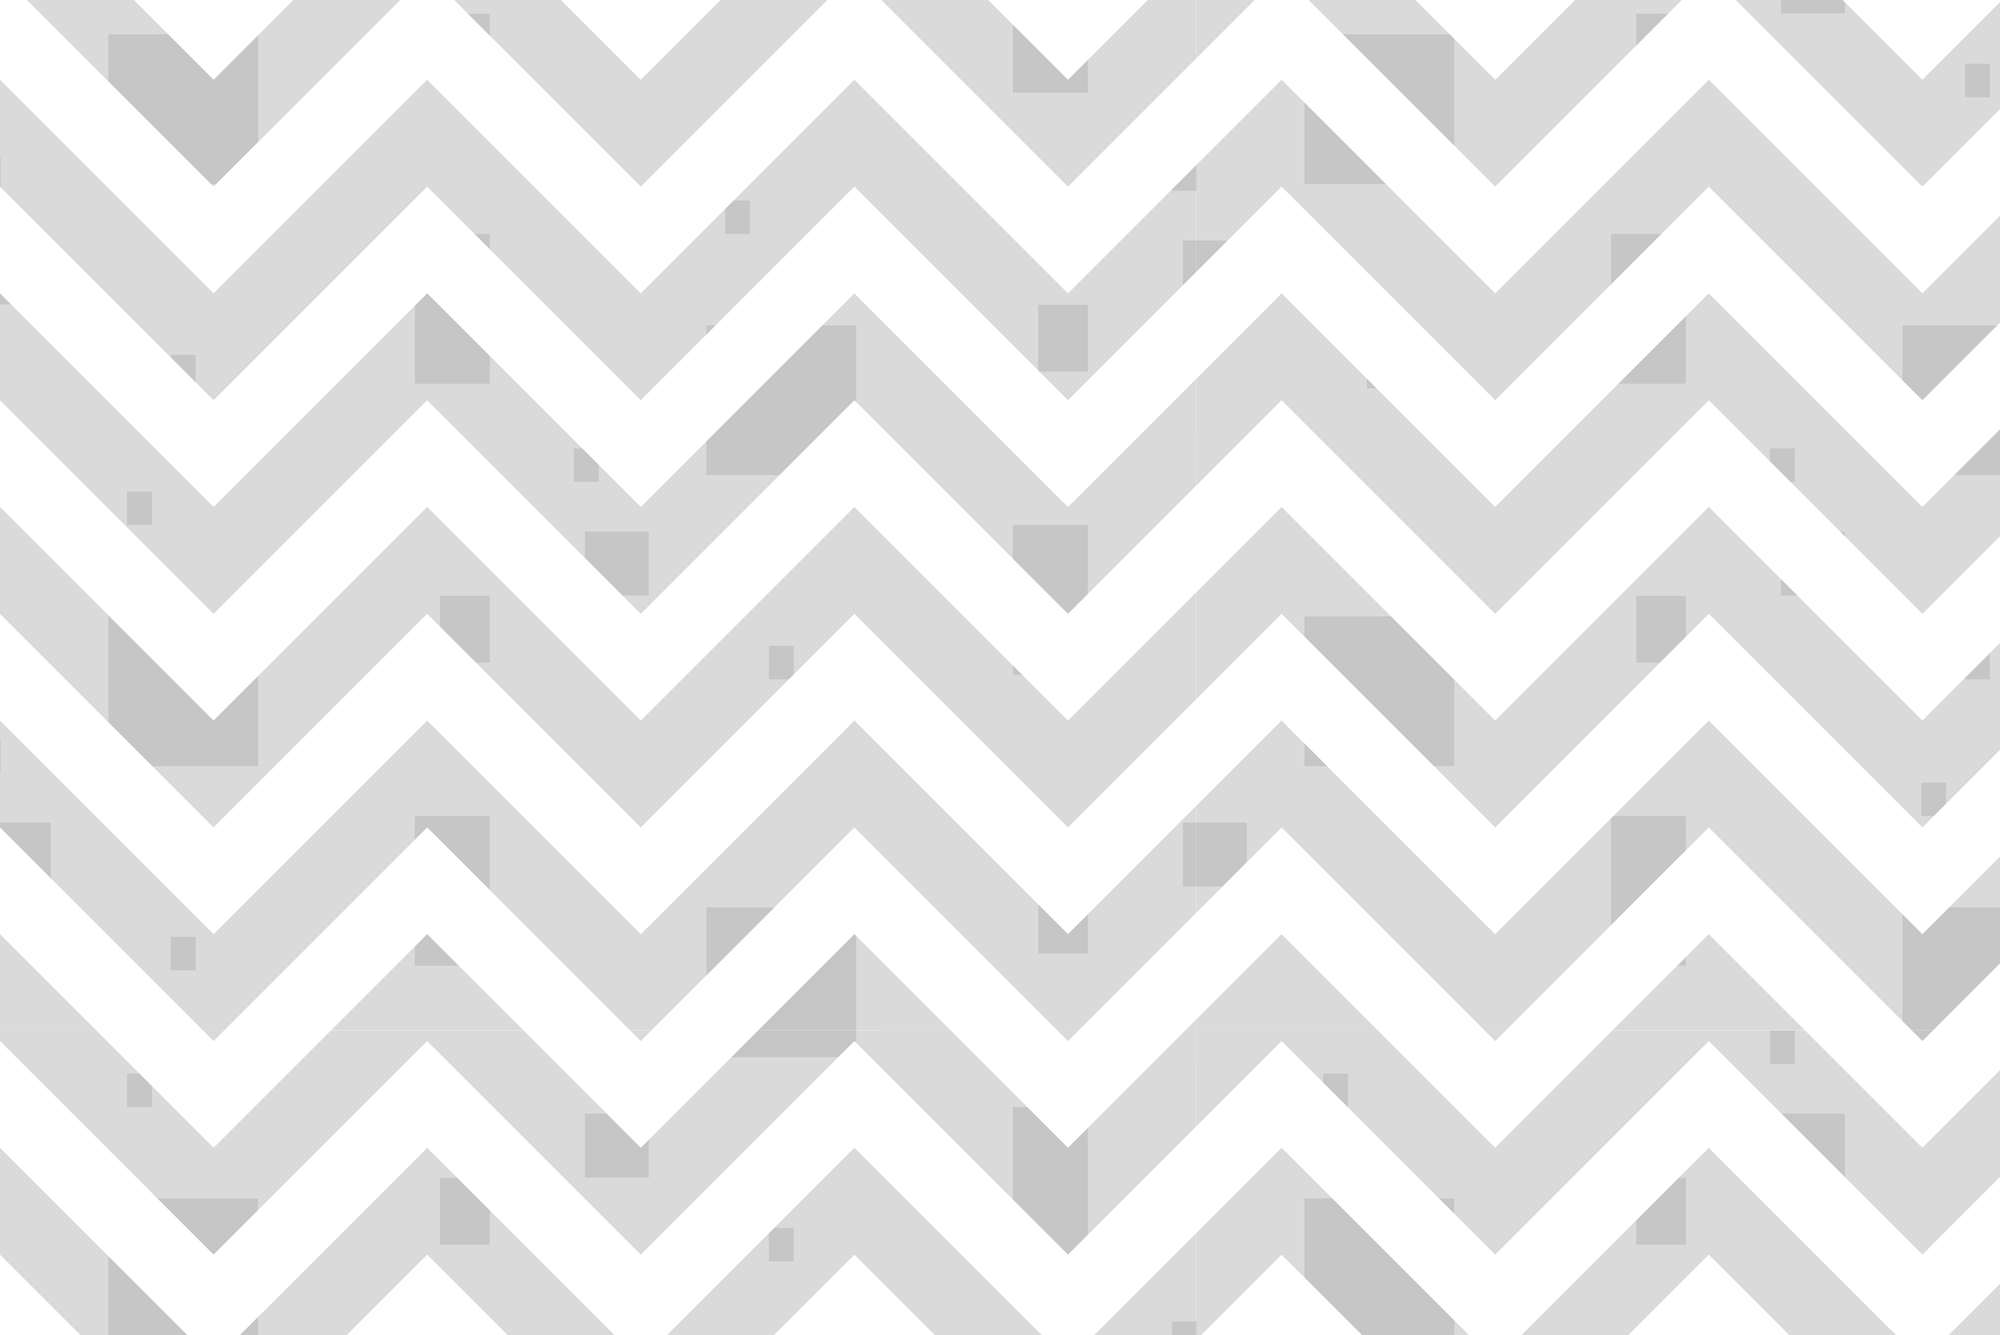             Design wall mural zig zag pattern with small squares grey on textured non-woven
        